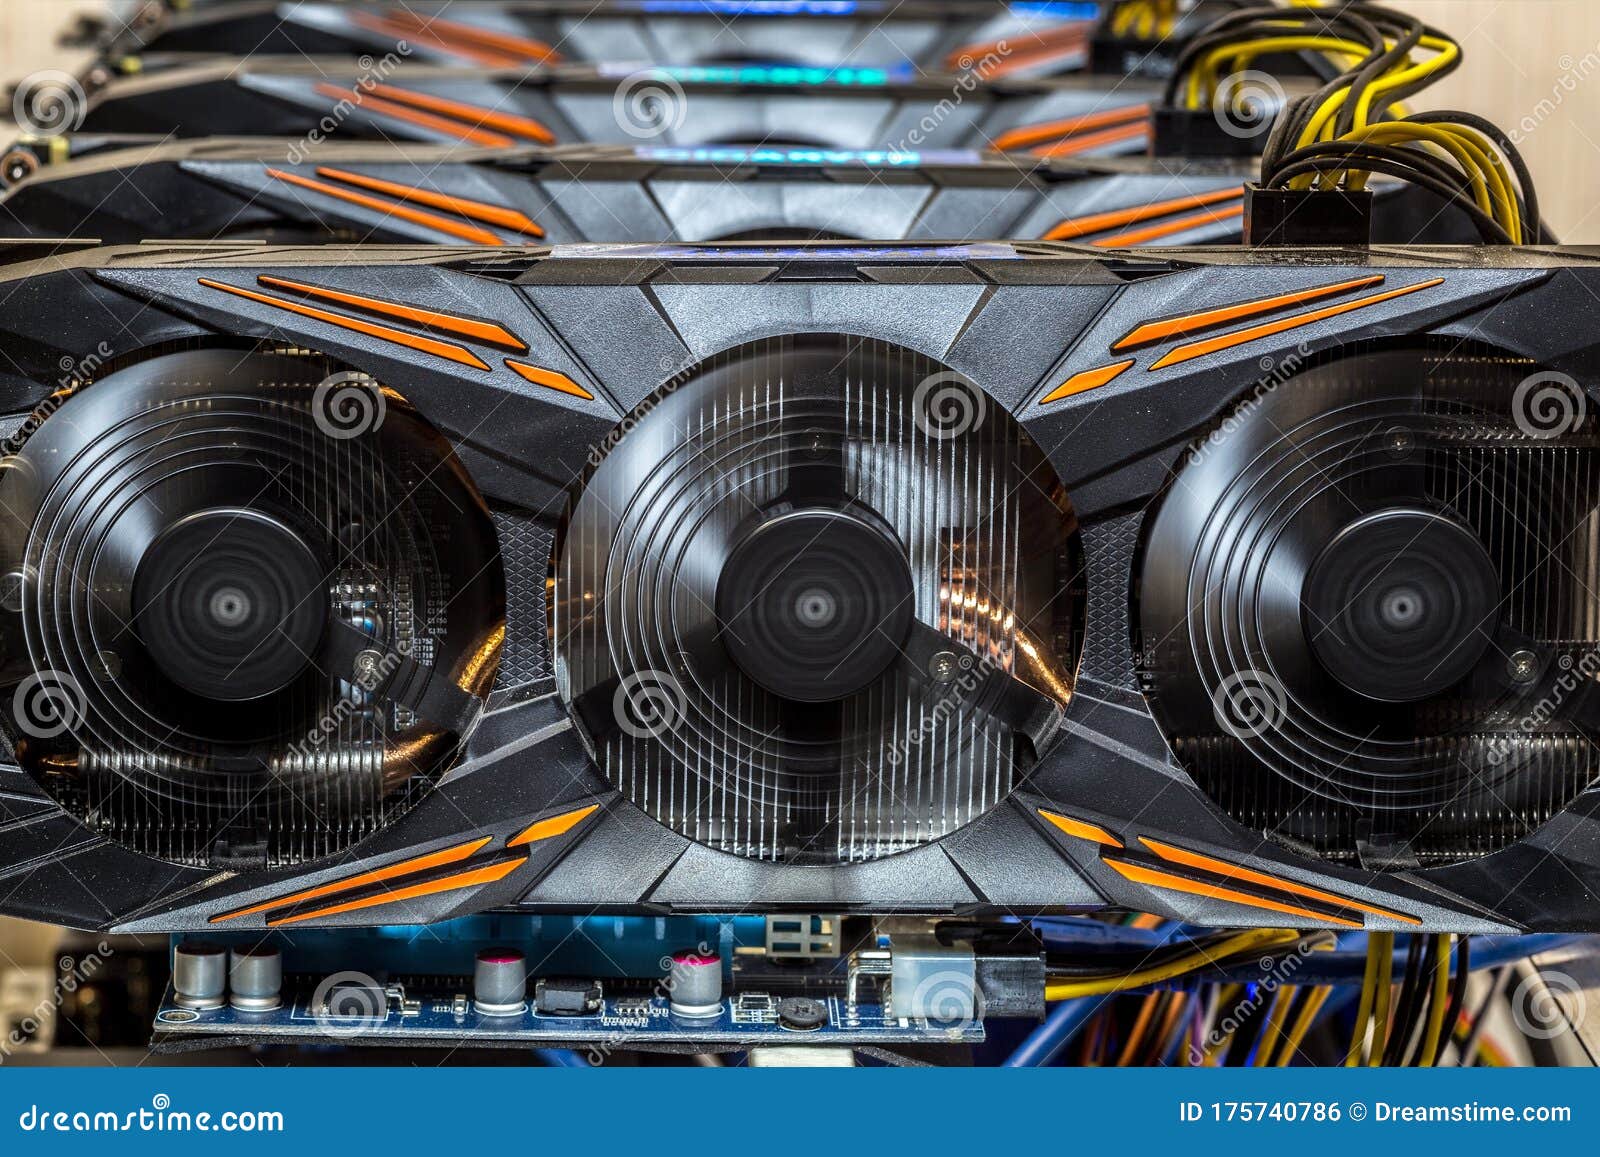 Mining Farm for Cryptocurrency. Stock Photo - Image of medium, fever